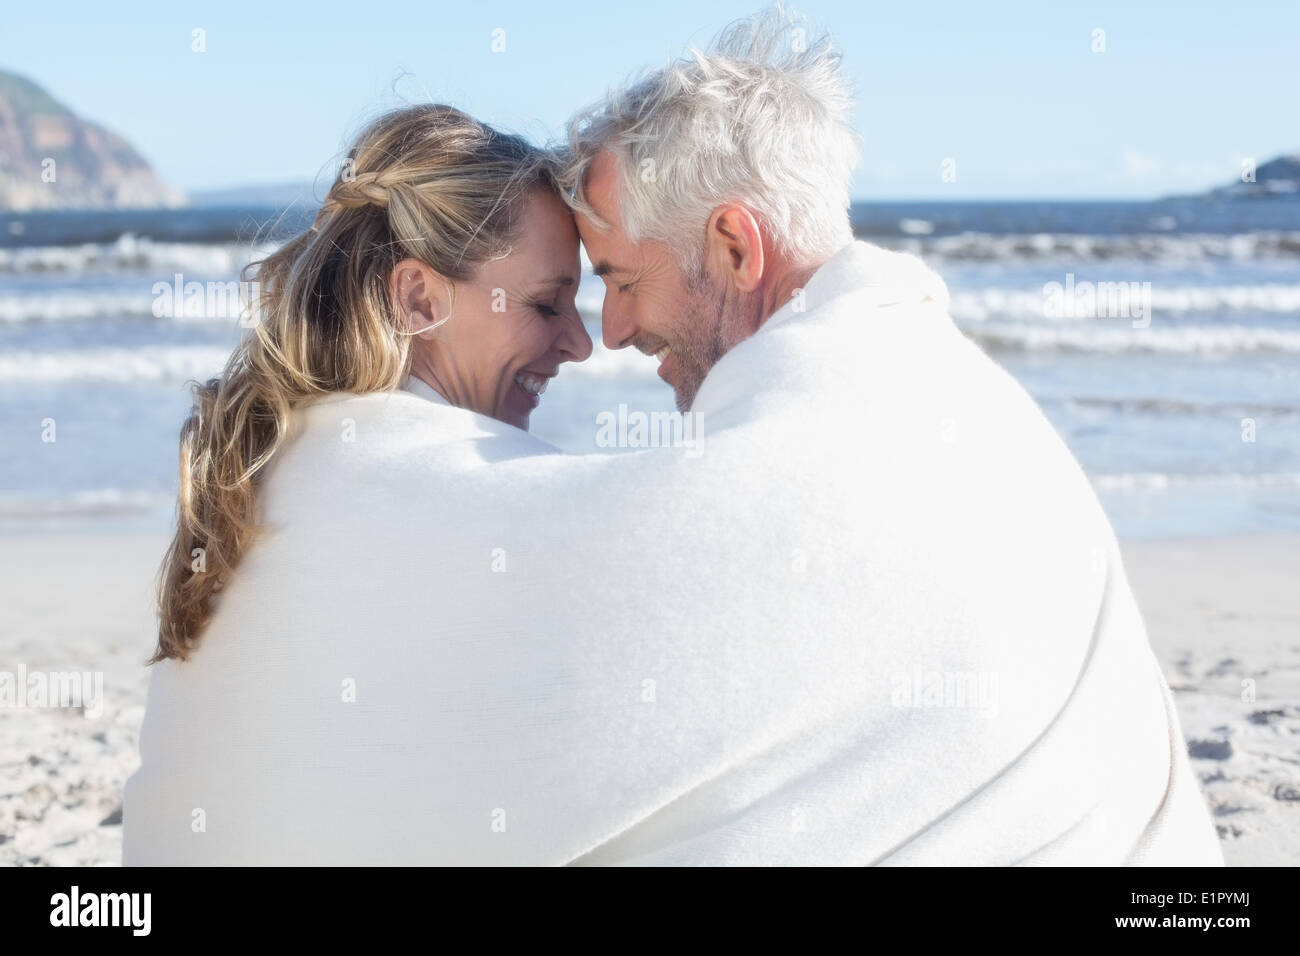 Couple sitting on the beach under blanket smiling at each other Stock Photo